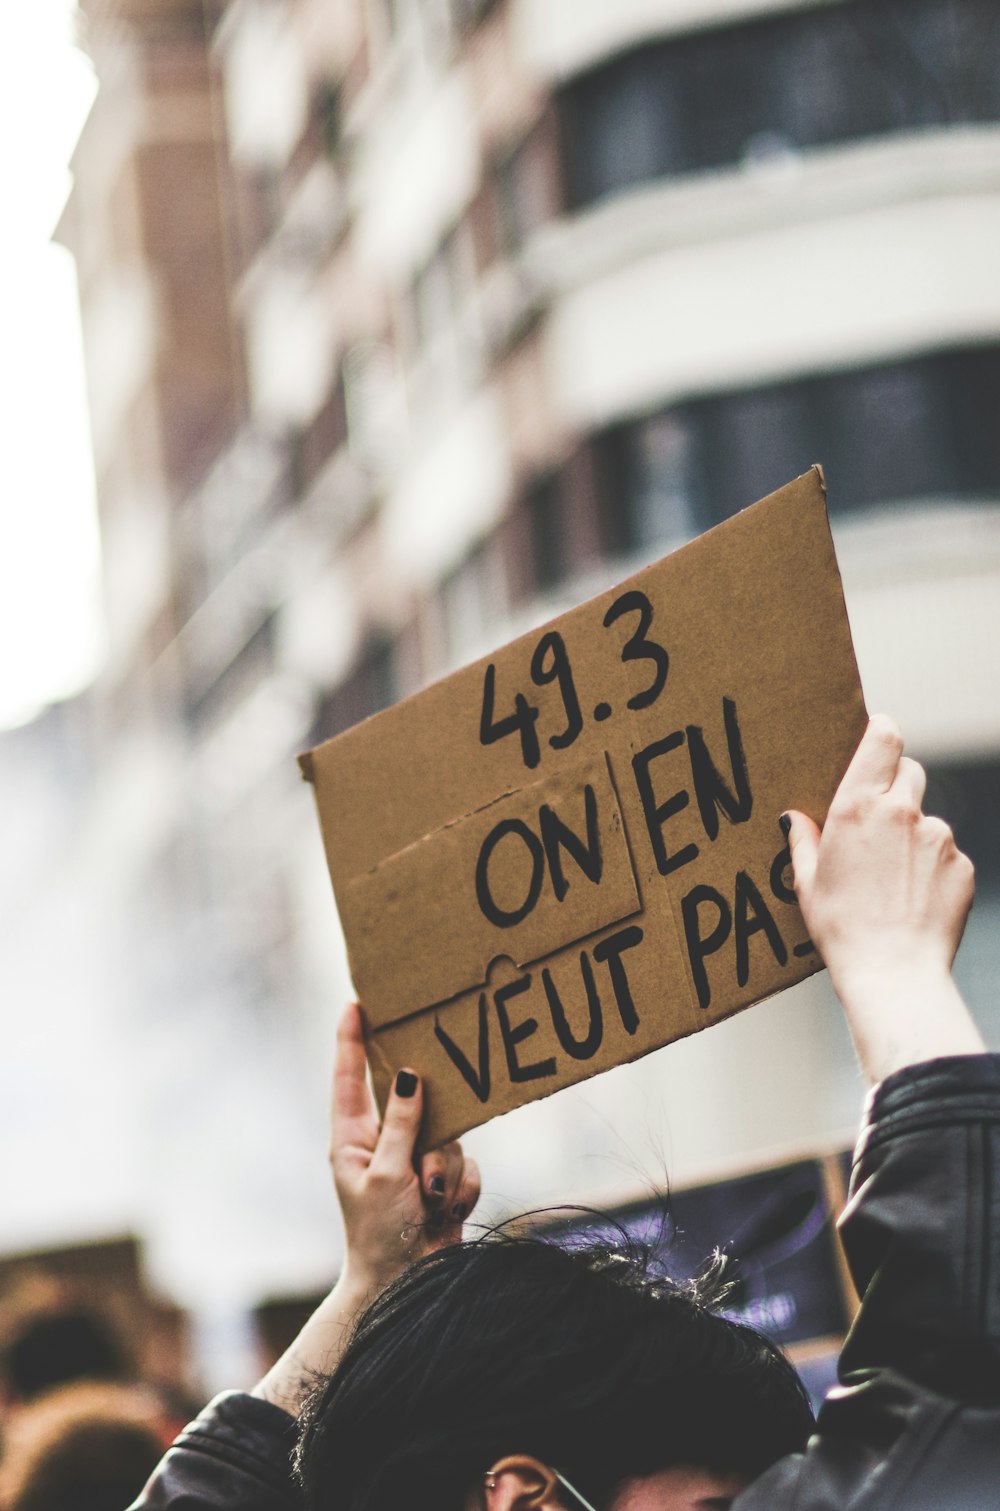 a person holding a sign that says 42 on en veut pa